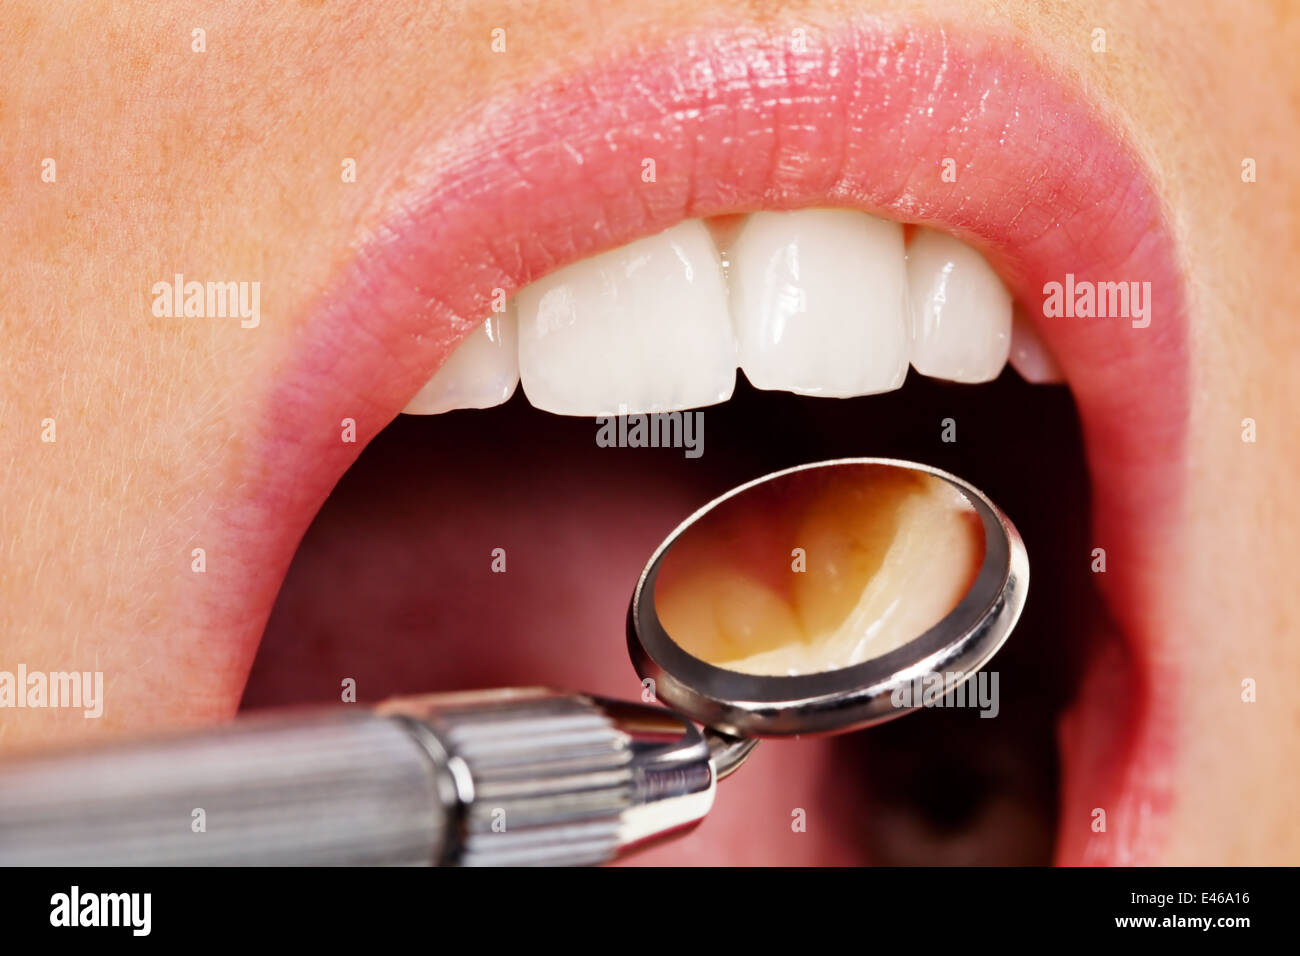 Teeth of a young woman to be examined by the dentist in the dental practice Stock Photo